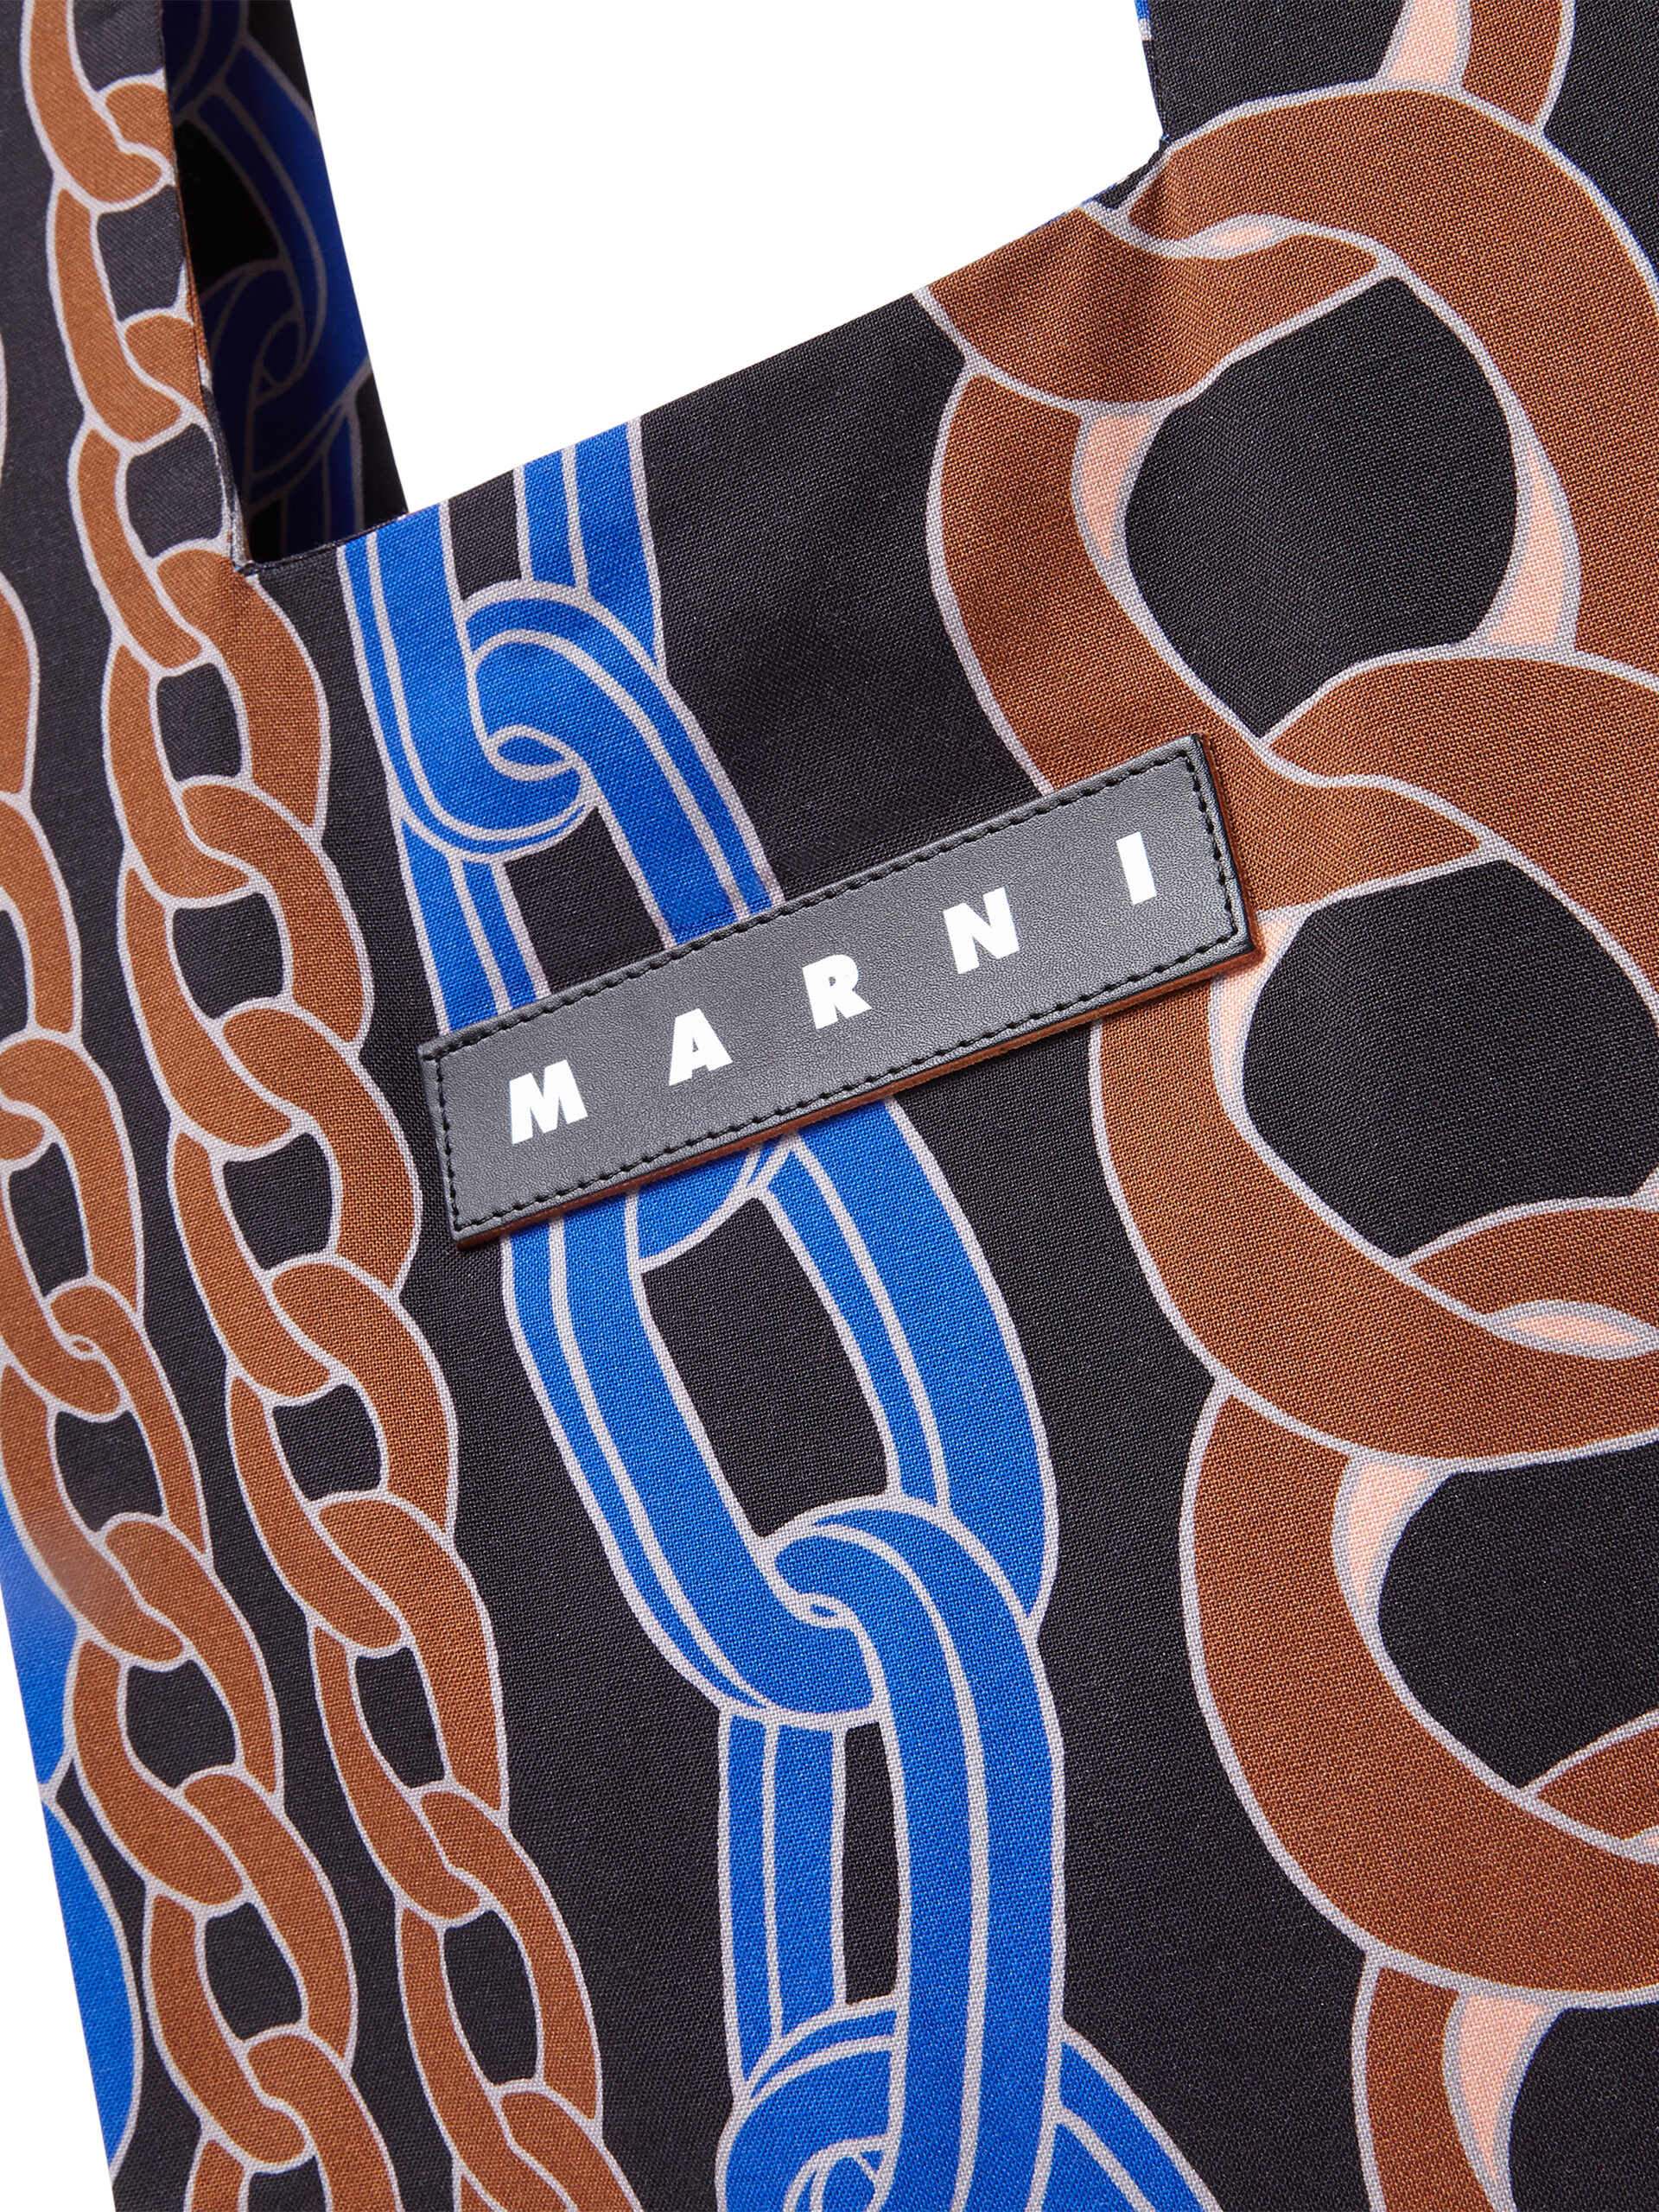 MARNI MARKET wool shopping bag with chain print - Shopping Bags - Image 4